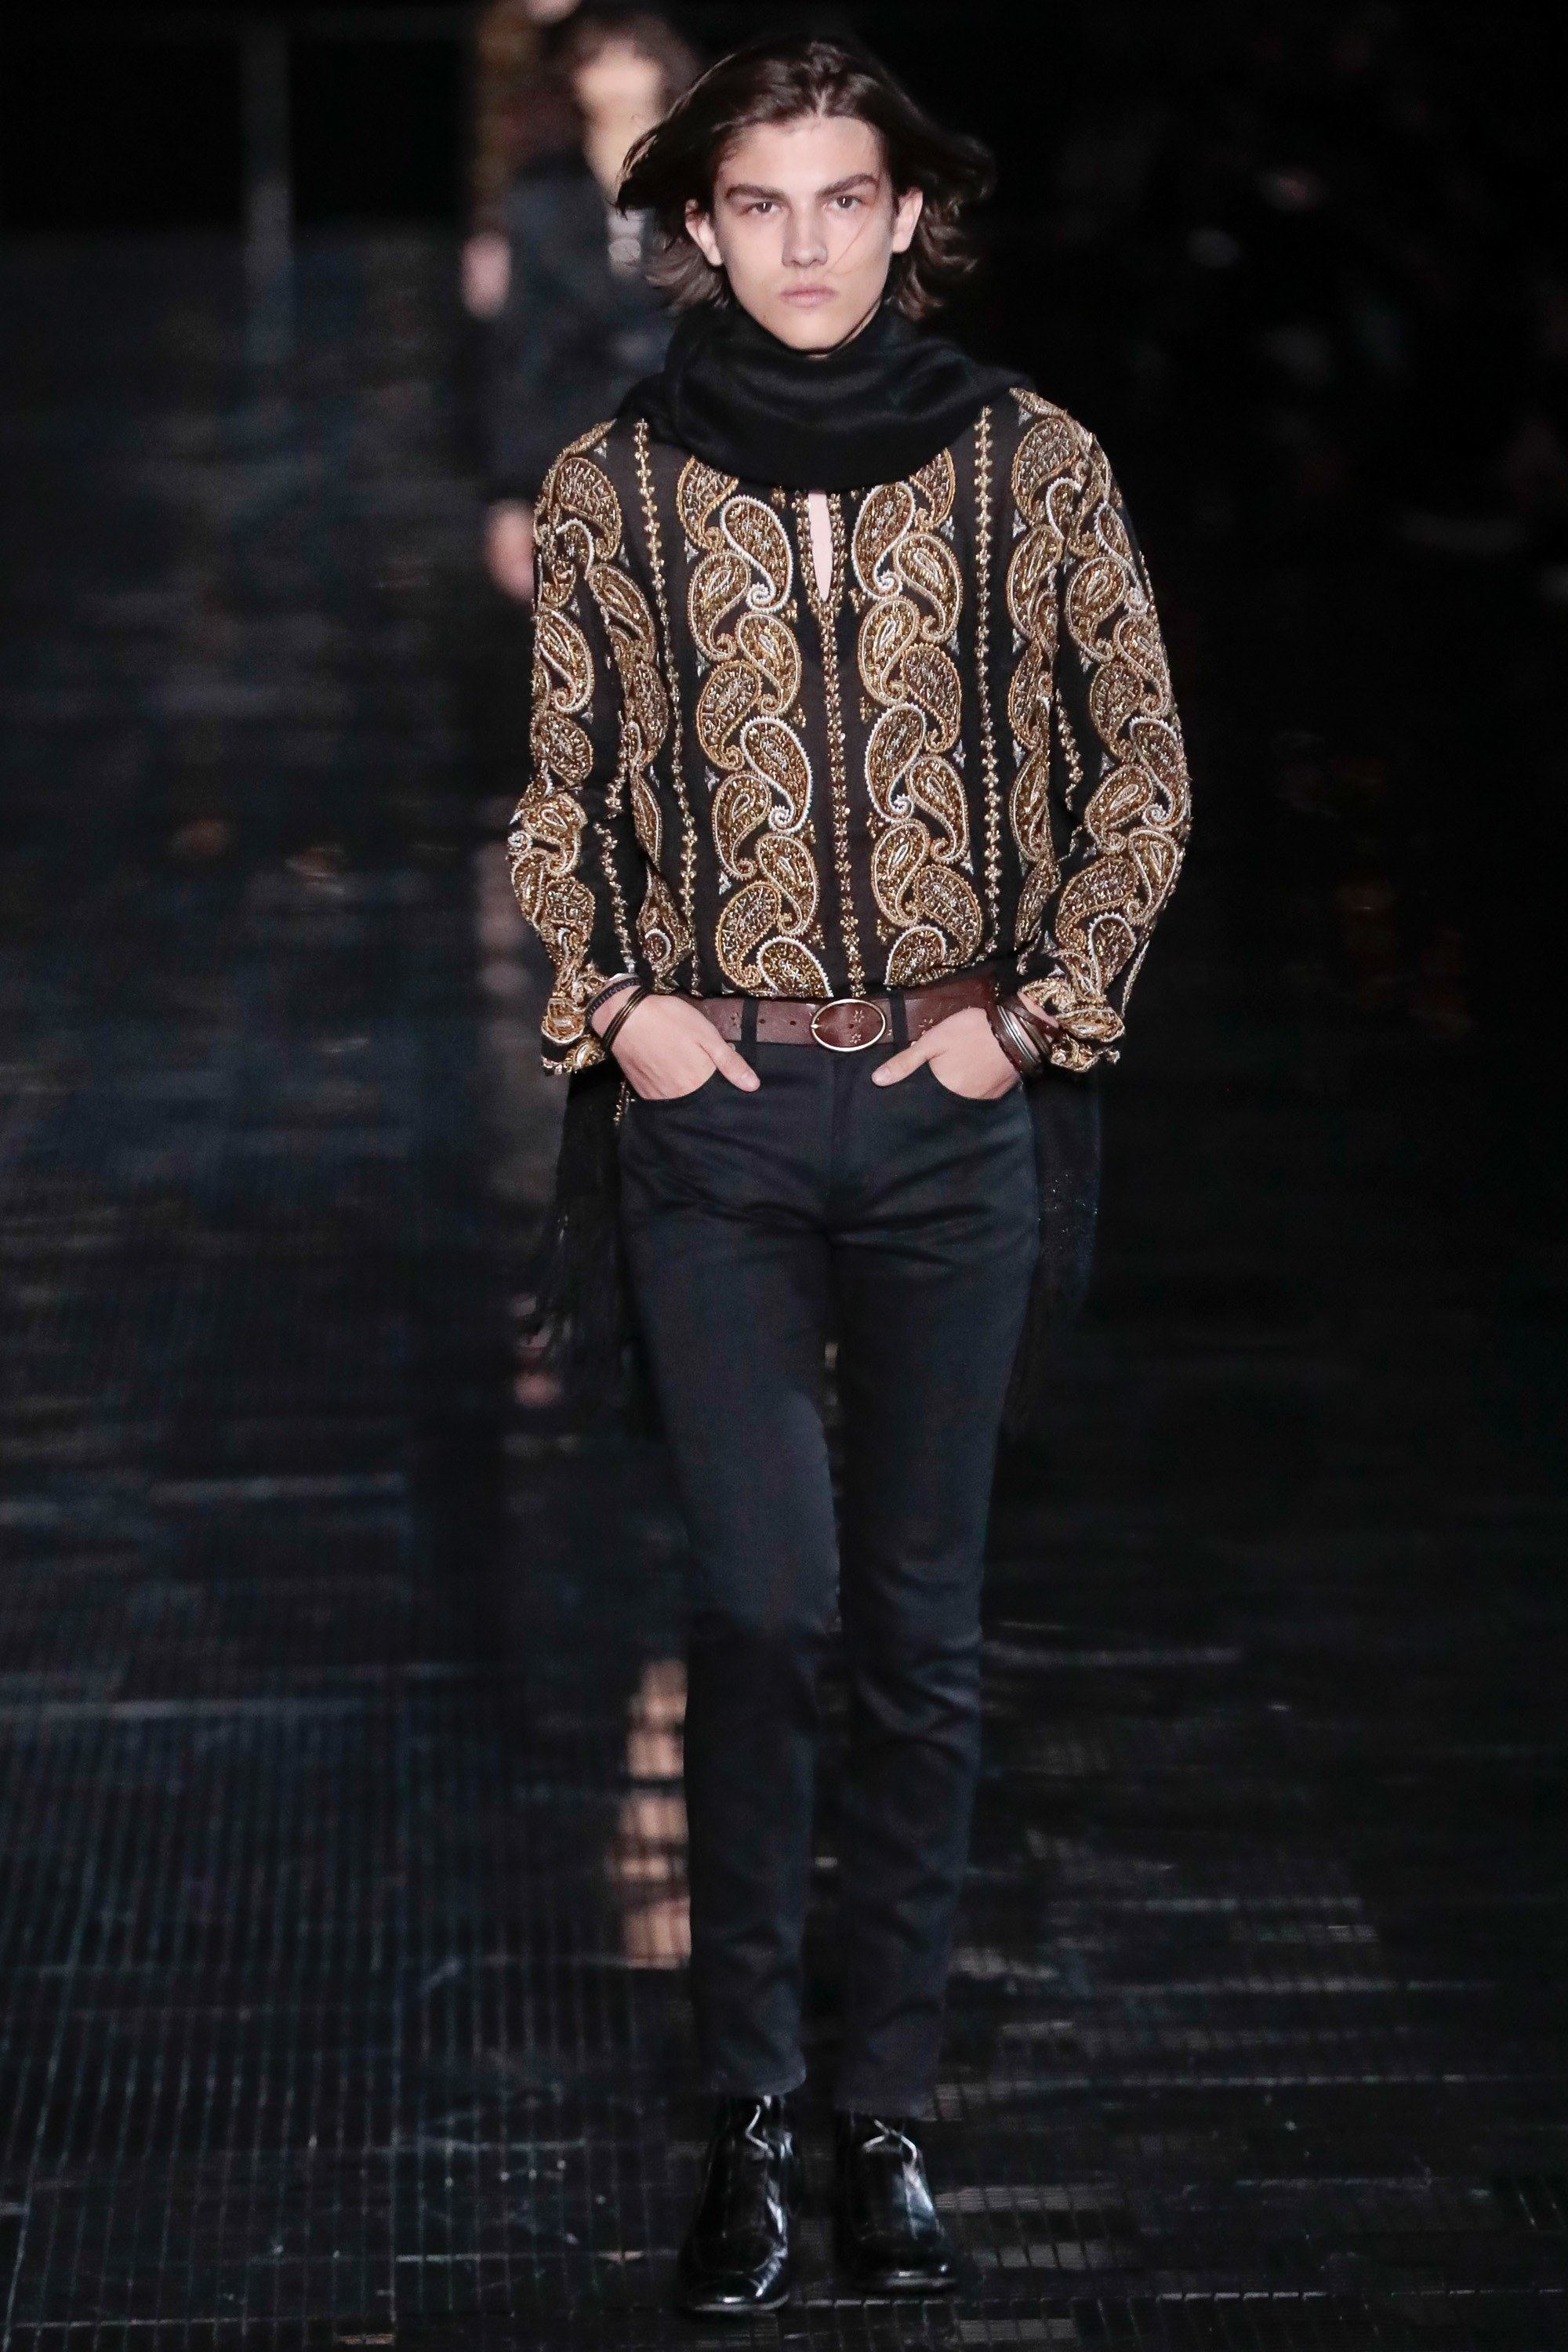 A look from Saint Laurent's Spring 2019